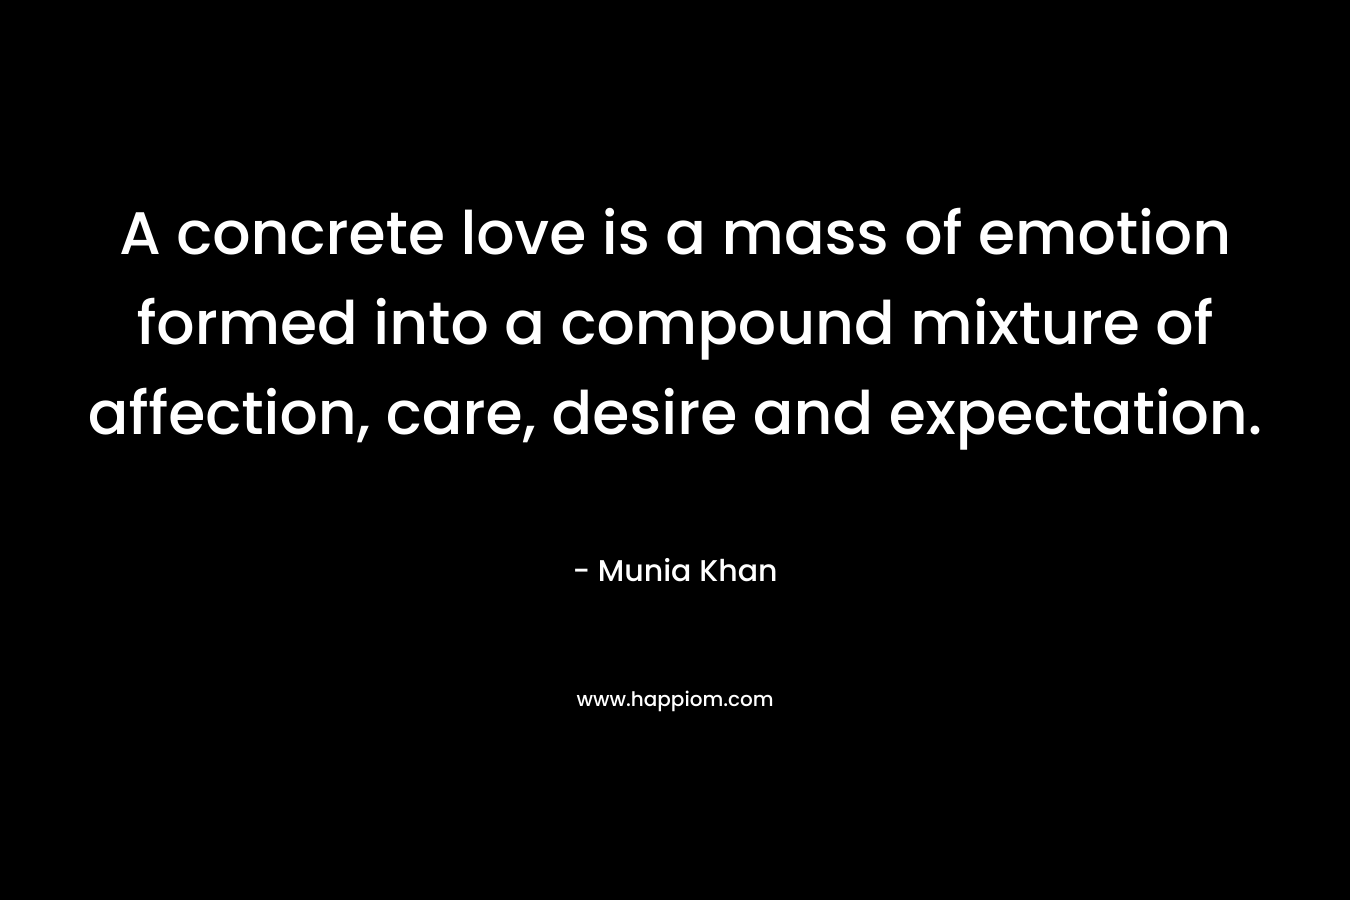 A concrete love is a mass of emotion formed into a compound mixture of affection, care, desire and expectation.